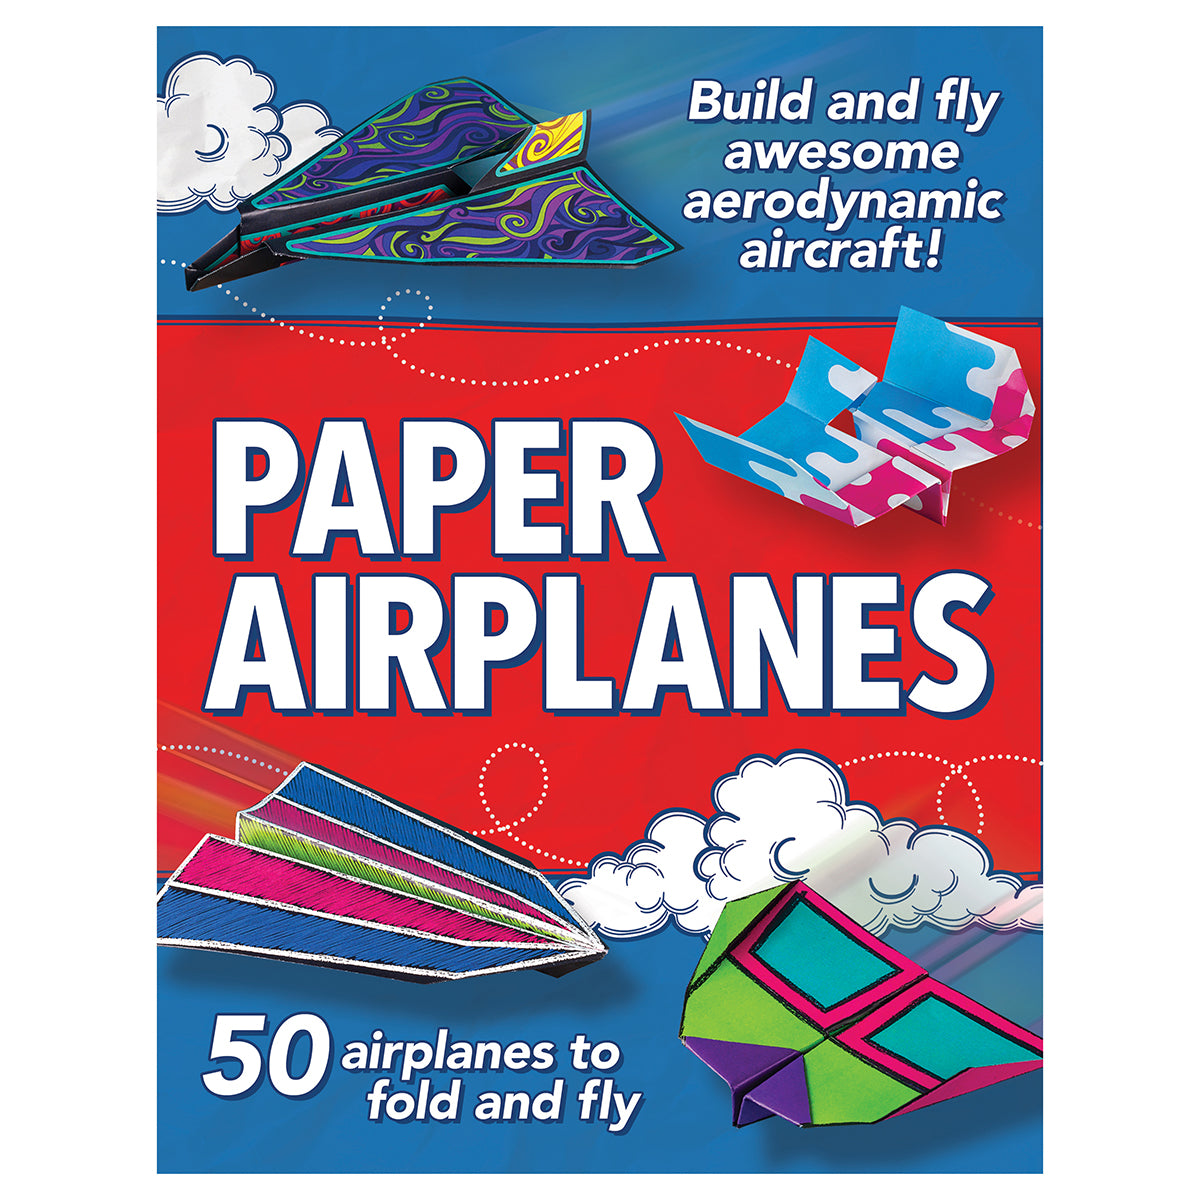 Fold and Fly Paper Airplane Kit – pilbooks